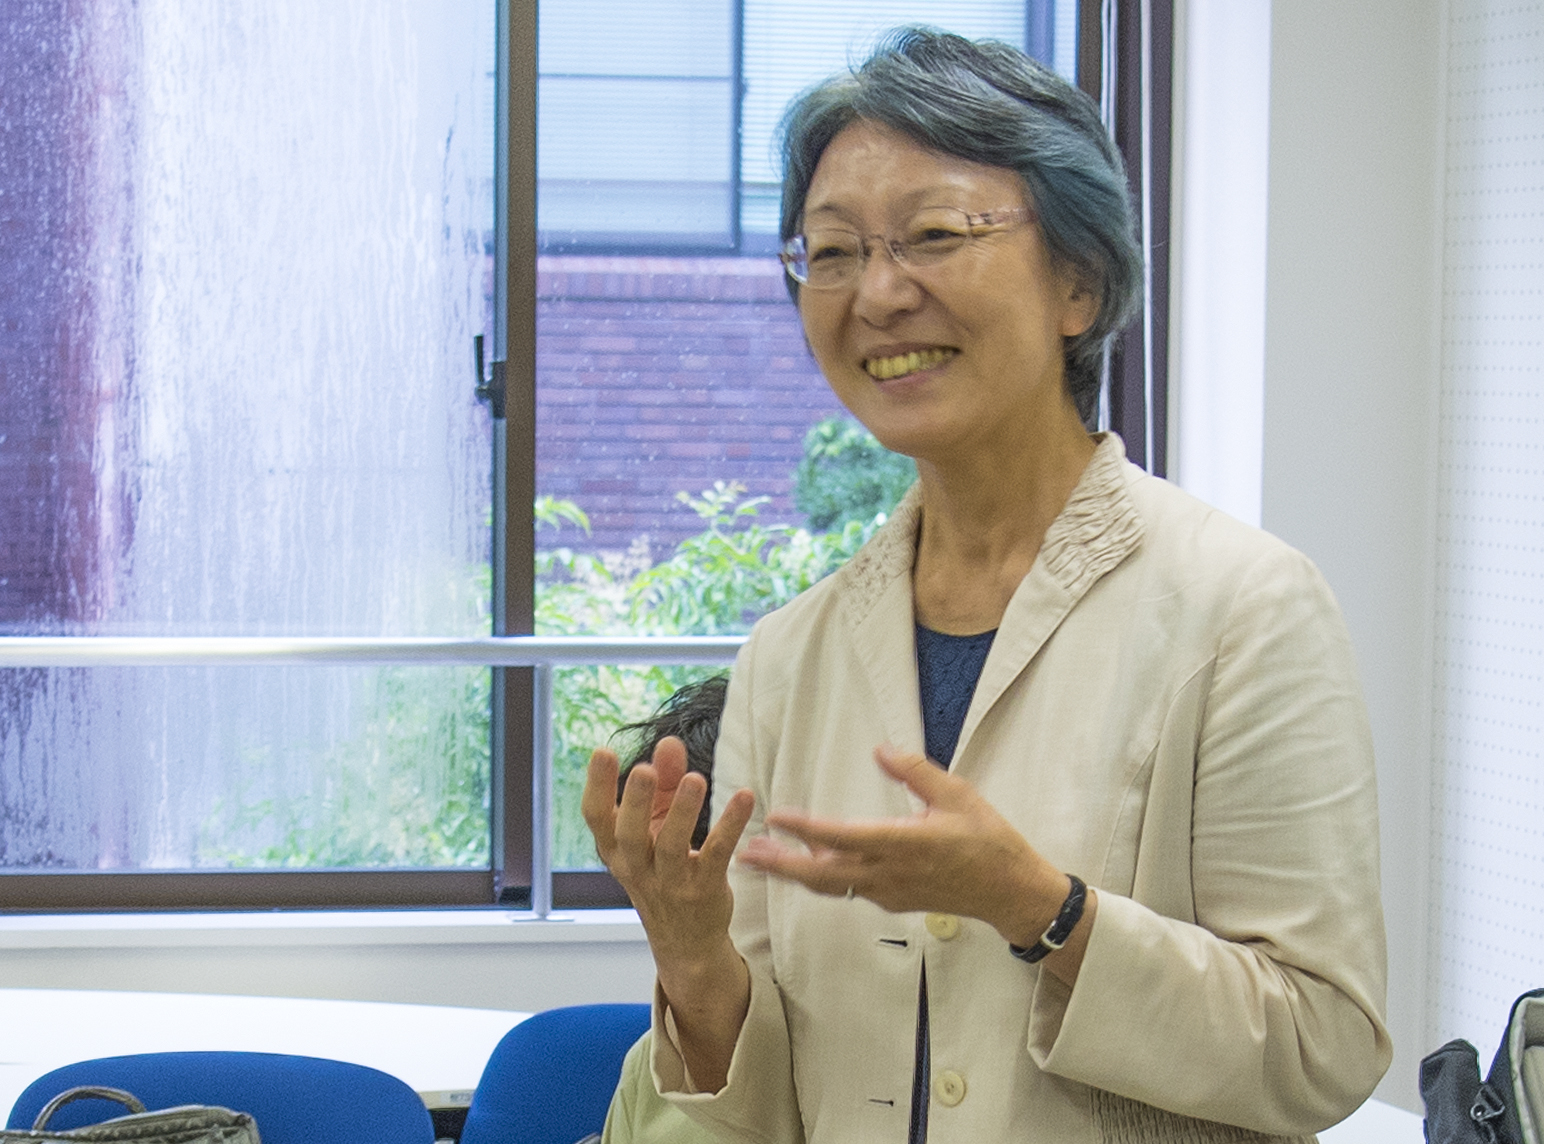 The first female dean of the College of International Relations at Ritsumeikan University smiles broadly